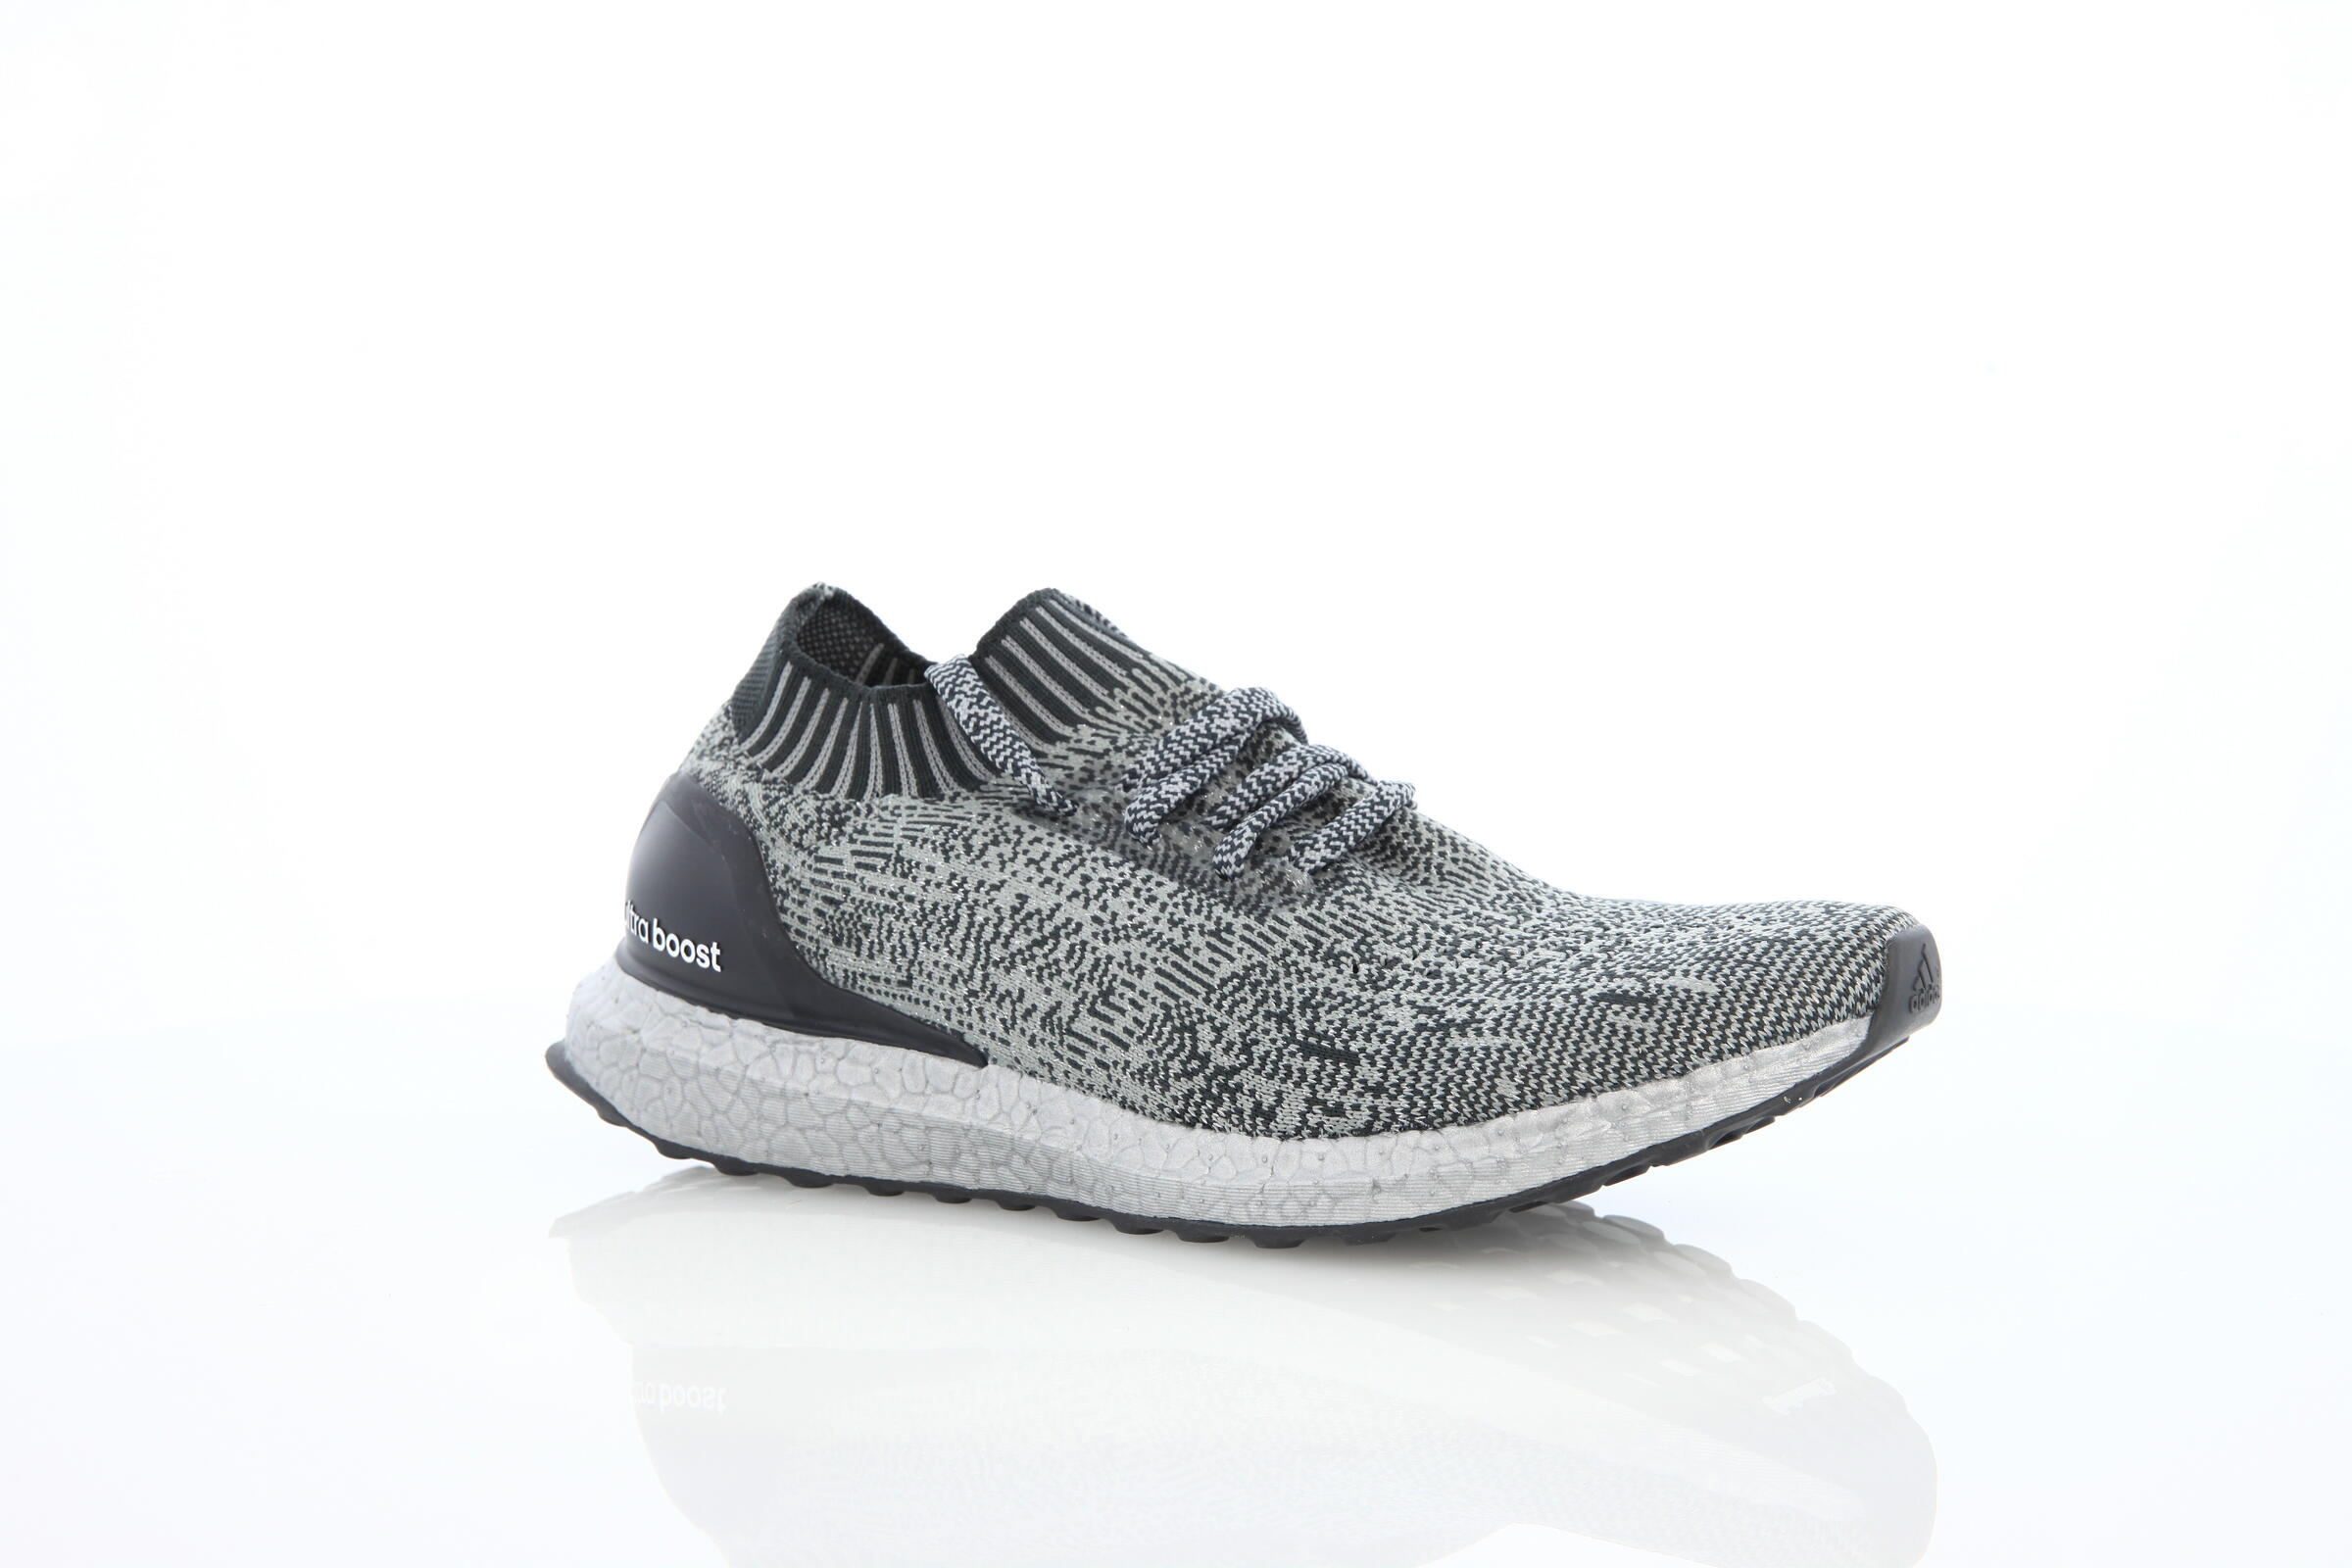 adidas Performance Ultraboost Uncaged "Solid Grey"